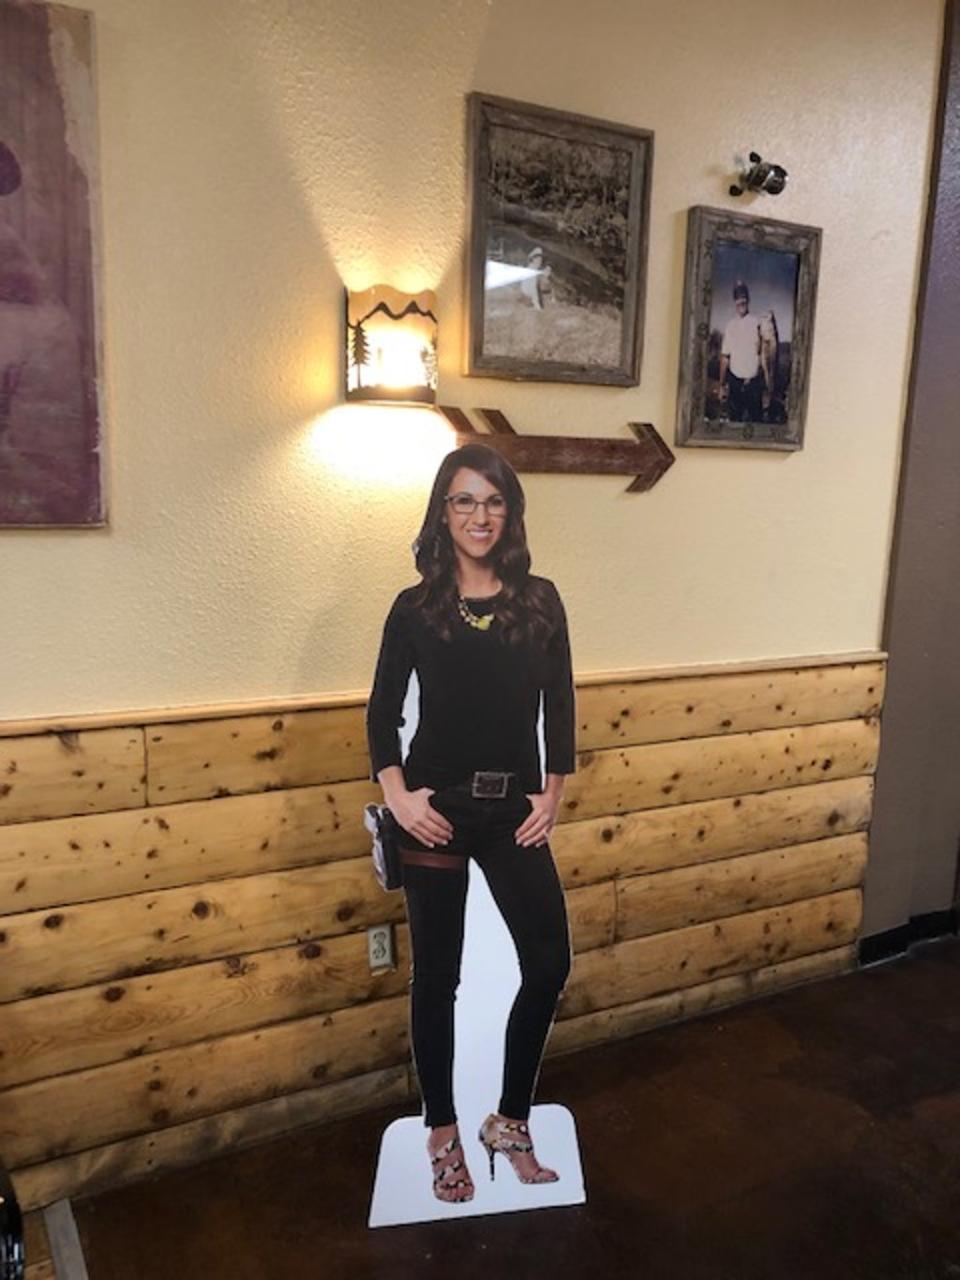 Boebert’s restaurant features cardboard cutouts of the congresswoman and Trump, attracting fans and the simply curious who want to pose for pictures with them (Sheila Flynn)